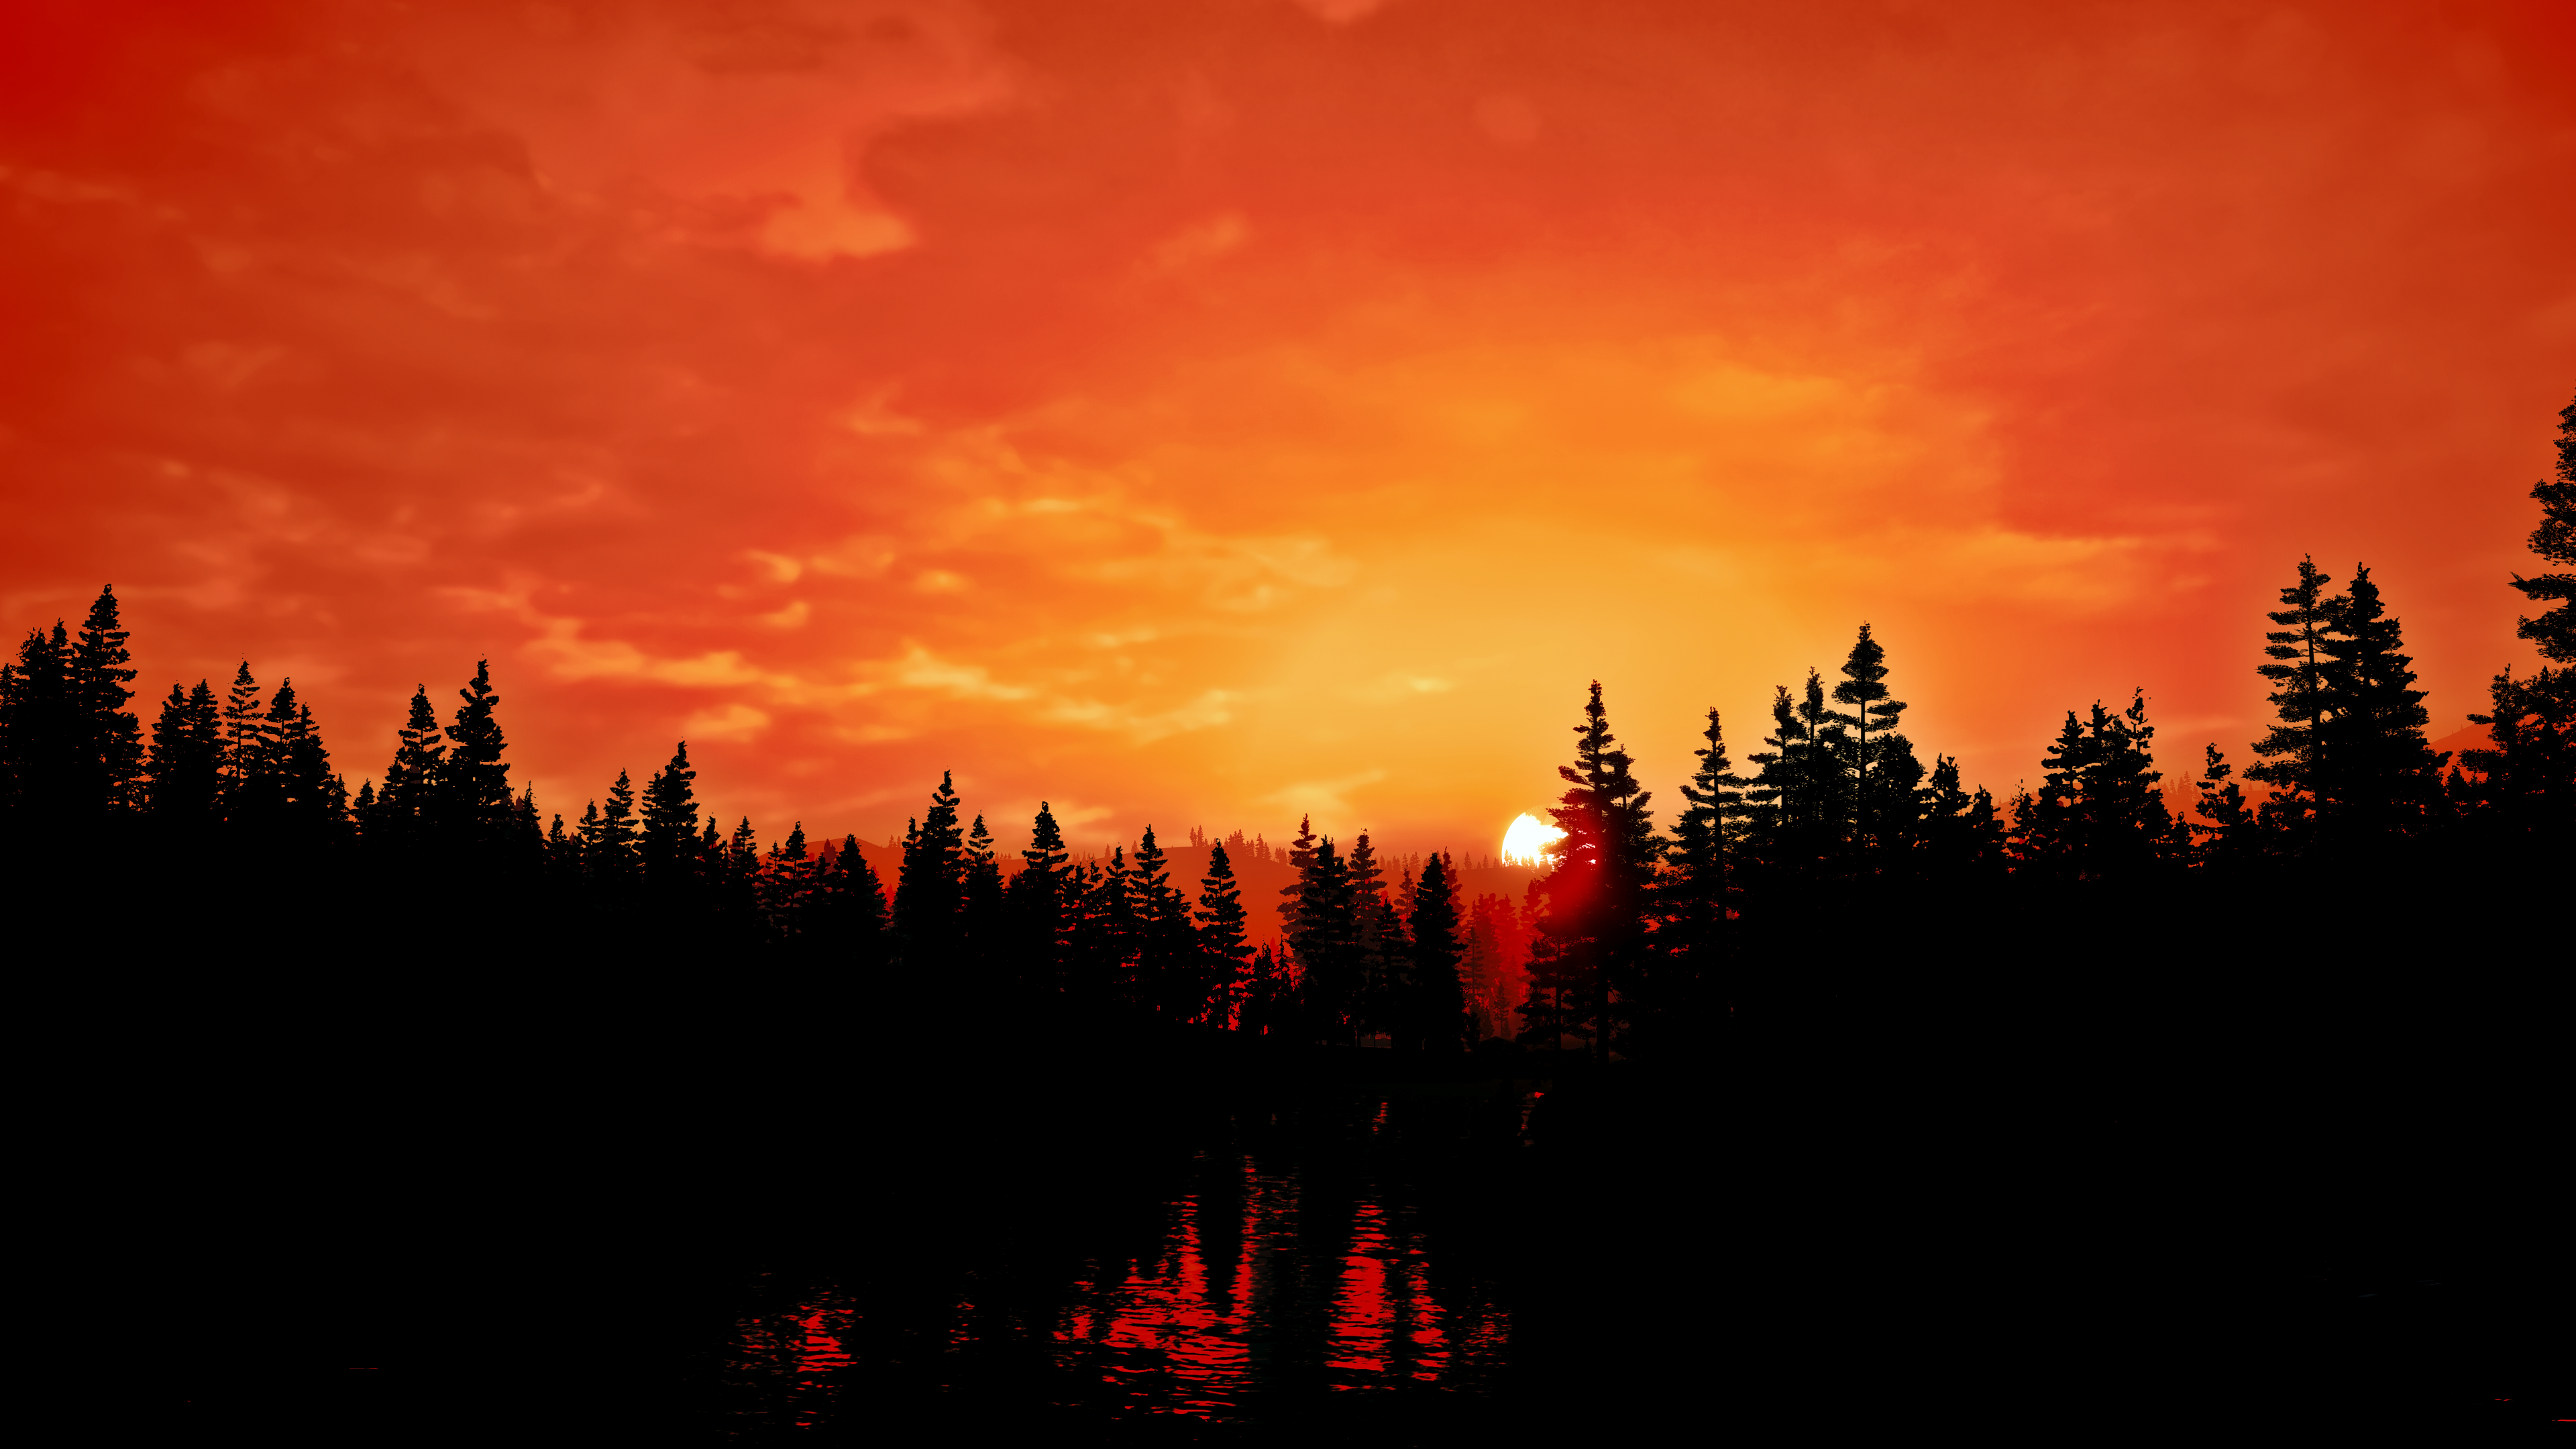 General 3840x2160 Far Cry 5 reshade sunset Moon sky forest nature Nvidia Reflex low light digital art video games